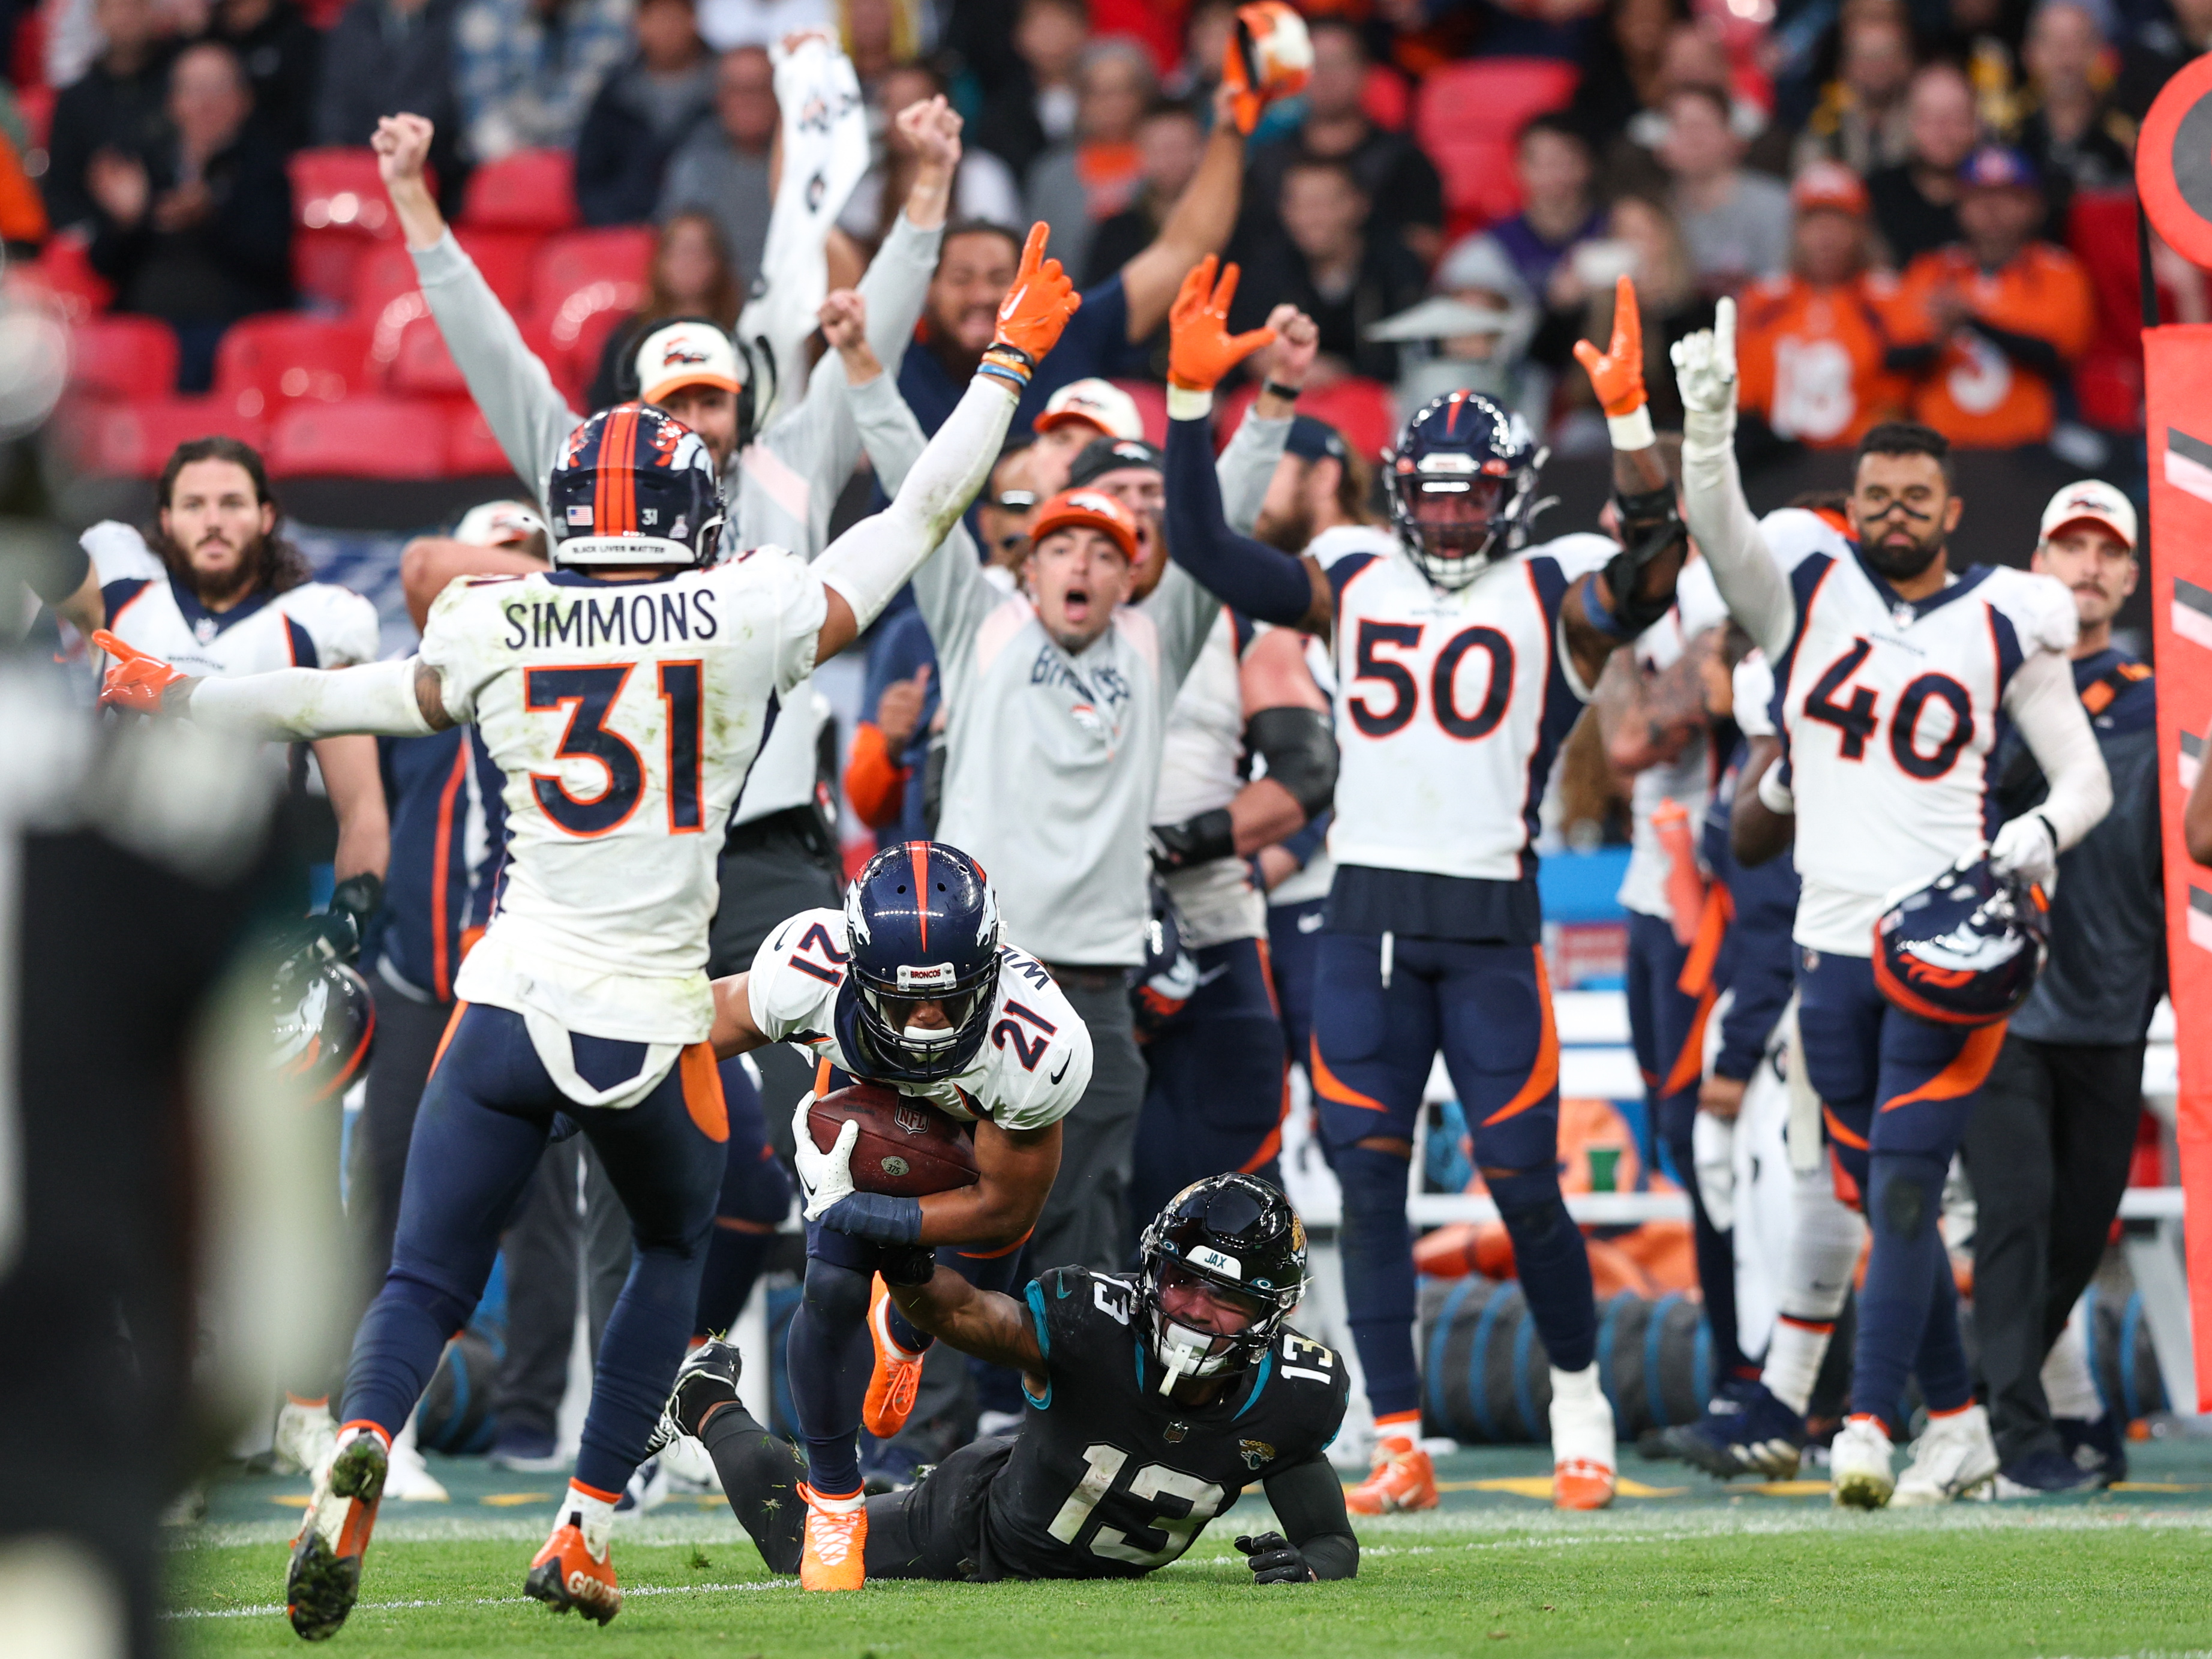 Denver Broncos cornerback KWaun Williams (21) intercepted the ball from Jacksonville Jaguars quarterback Trevor Lawrence (16) (not pictured) in the fourth quarter during an NFL International Series game at Wembley Stadium. 